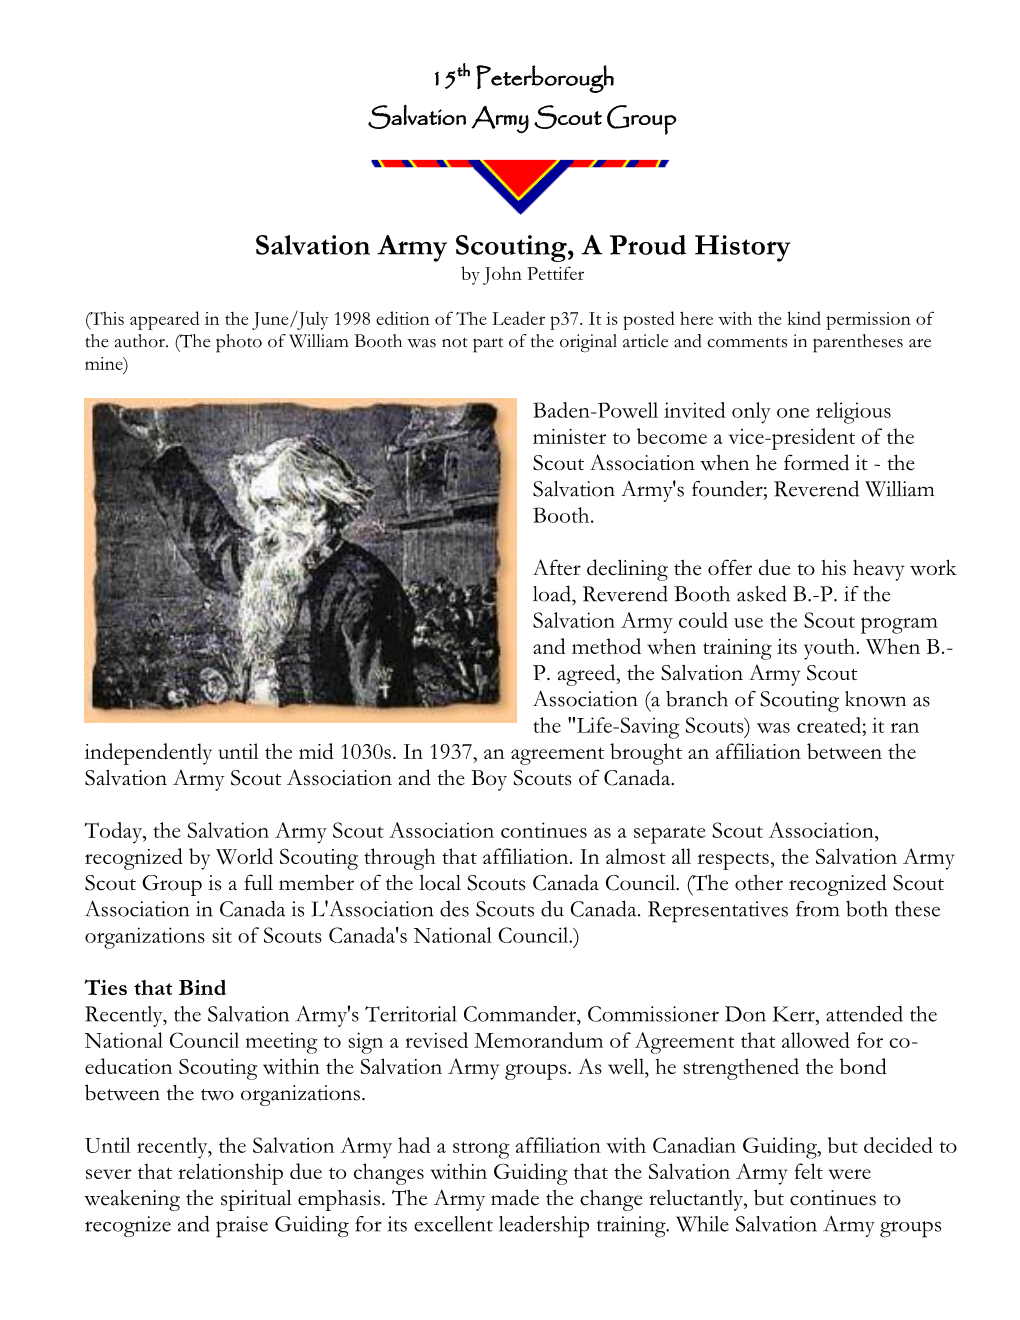 Salvation Army Scouting, a Proud History by John Pettifer